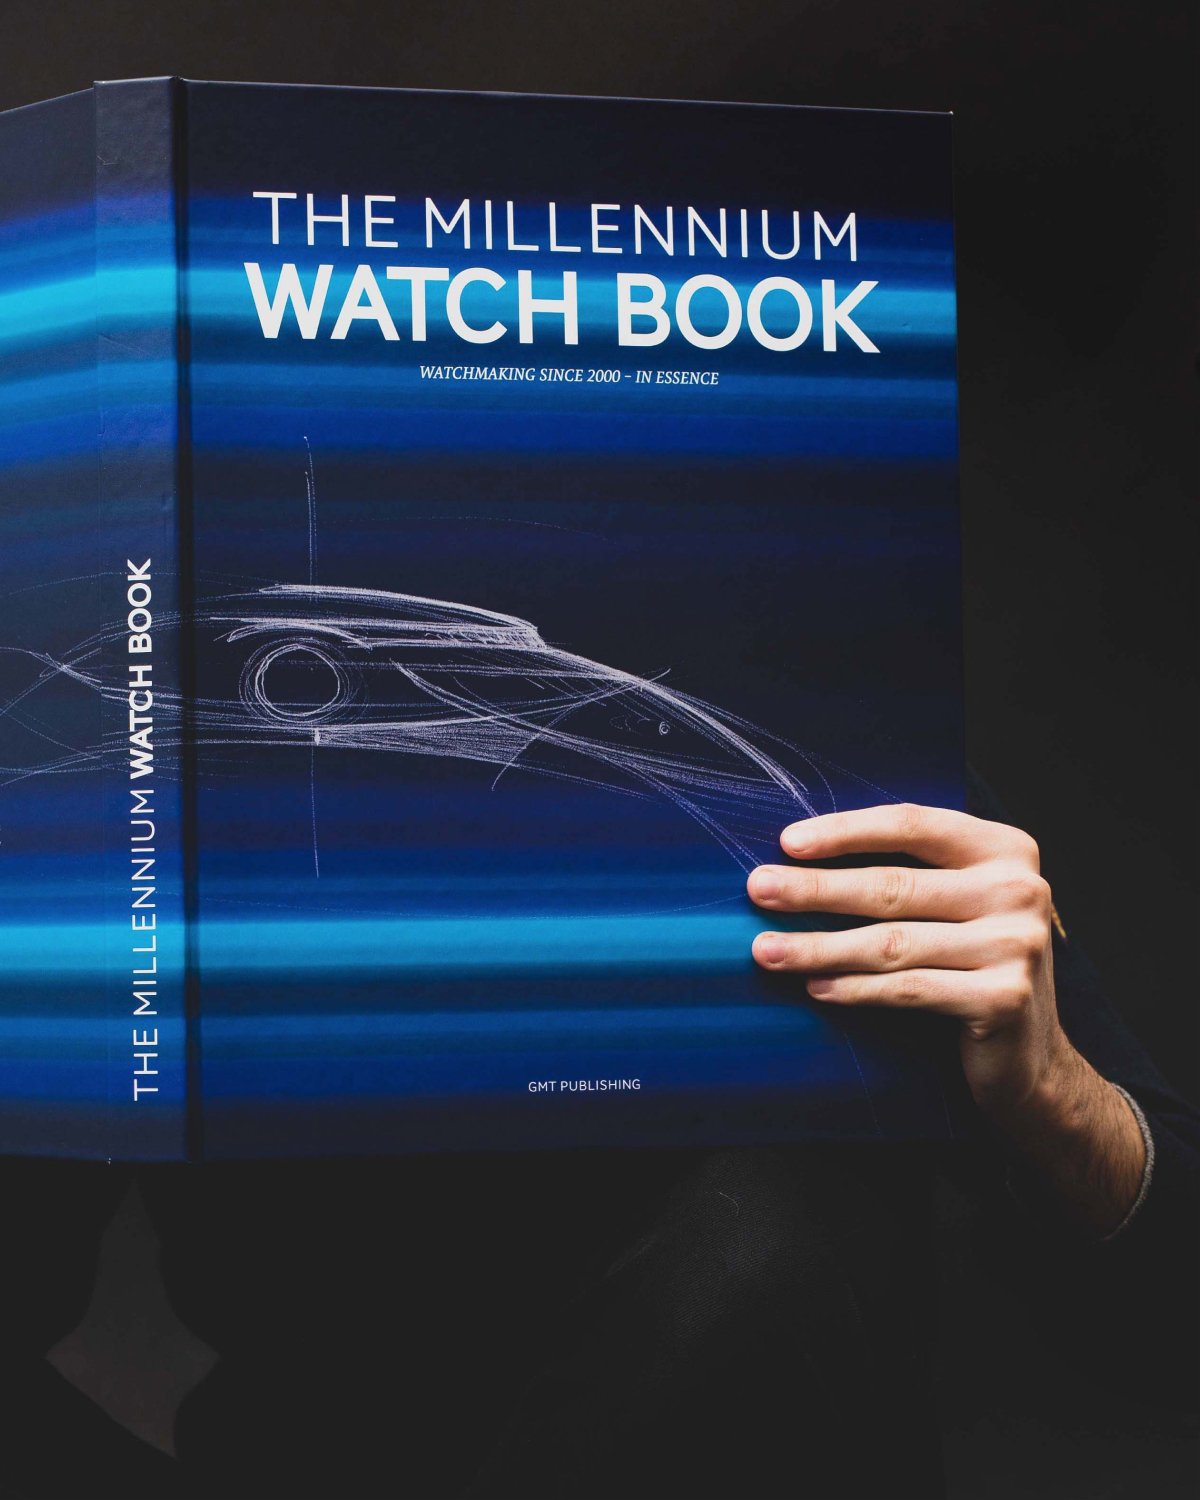 The millenium watch book becomes a collection